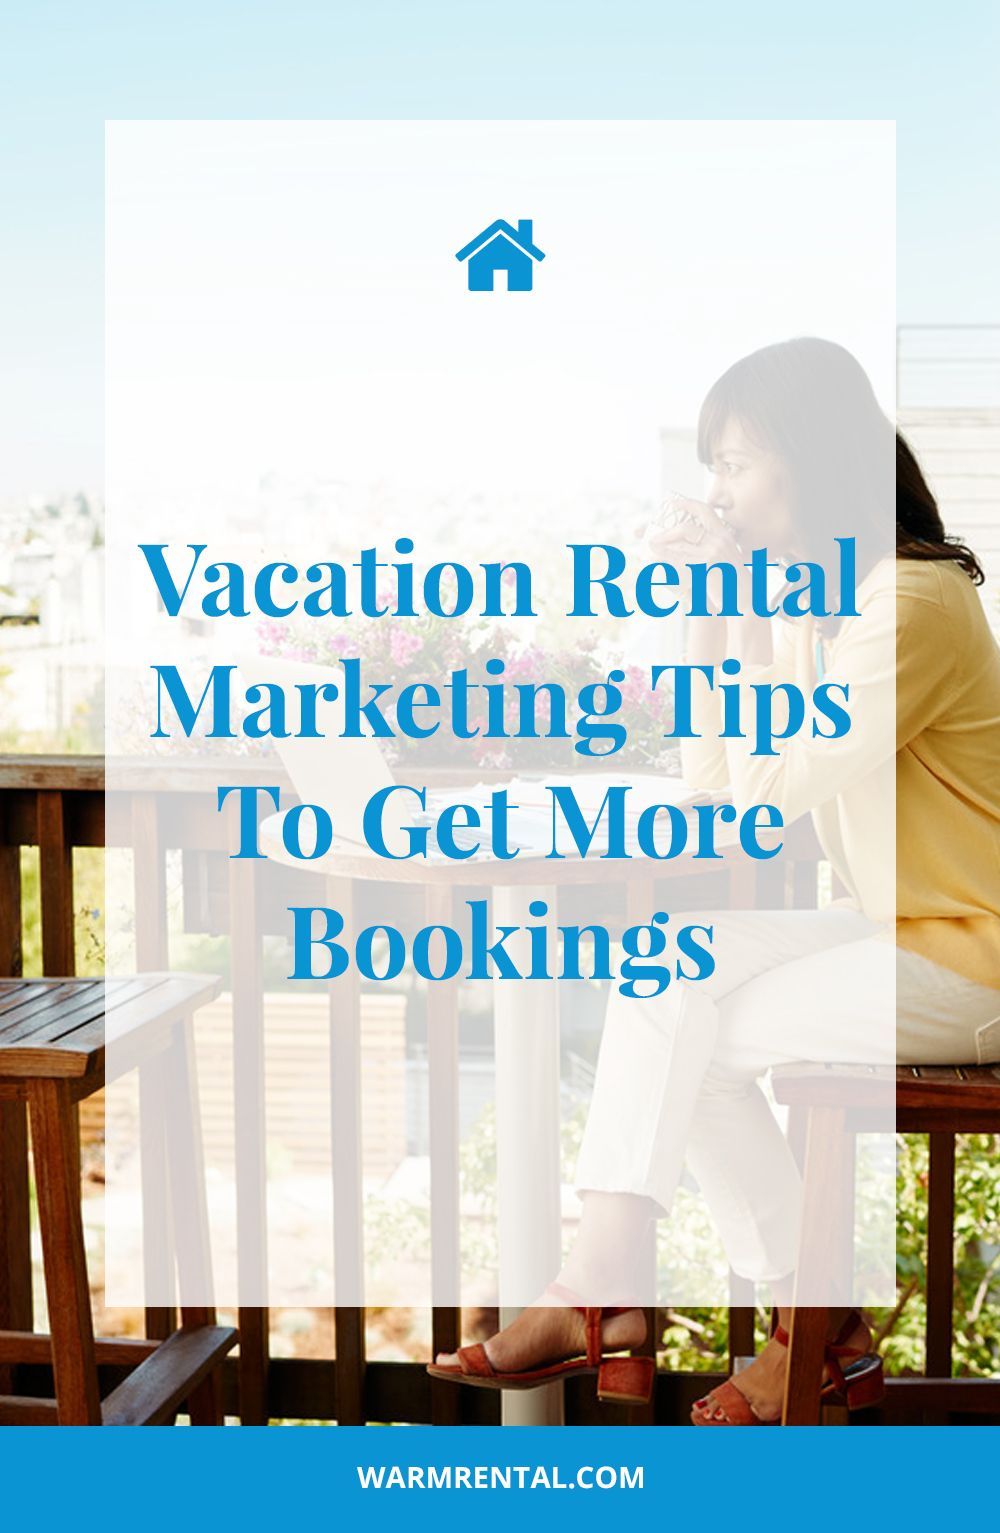 8 Vacation Rental Marketing Tips To Get More Bookings - Short Rentals Vacation Blog - Warmrental -   18 holiday Home tips ideas